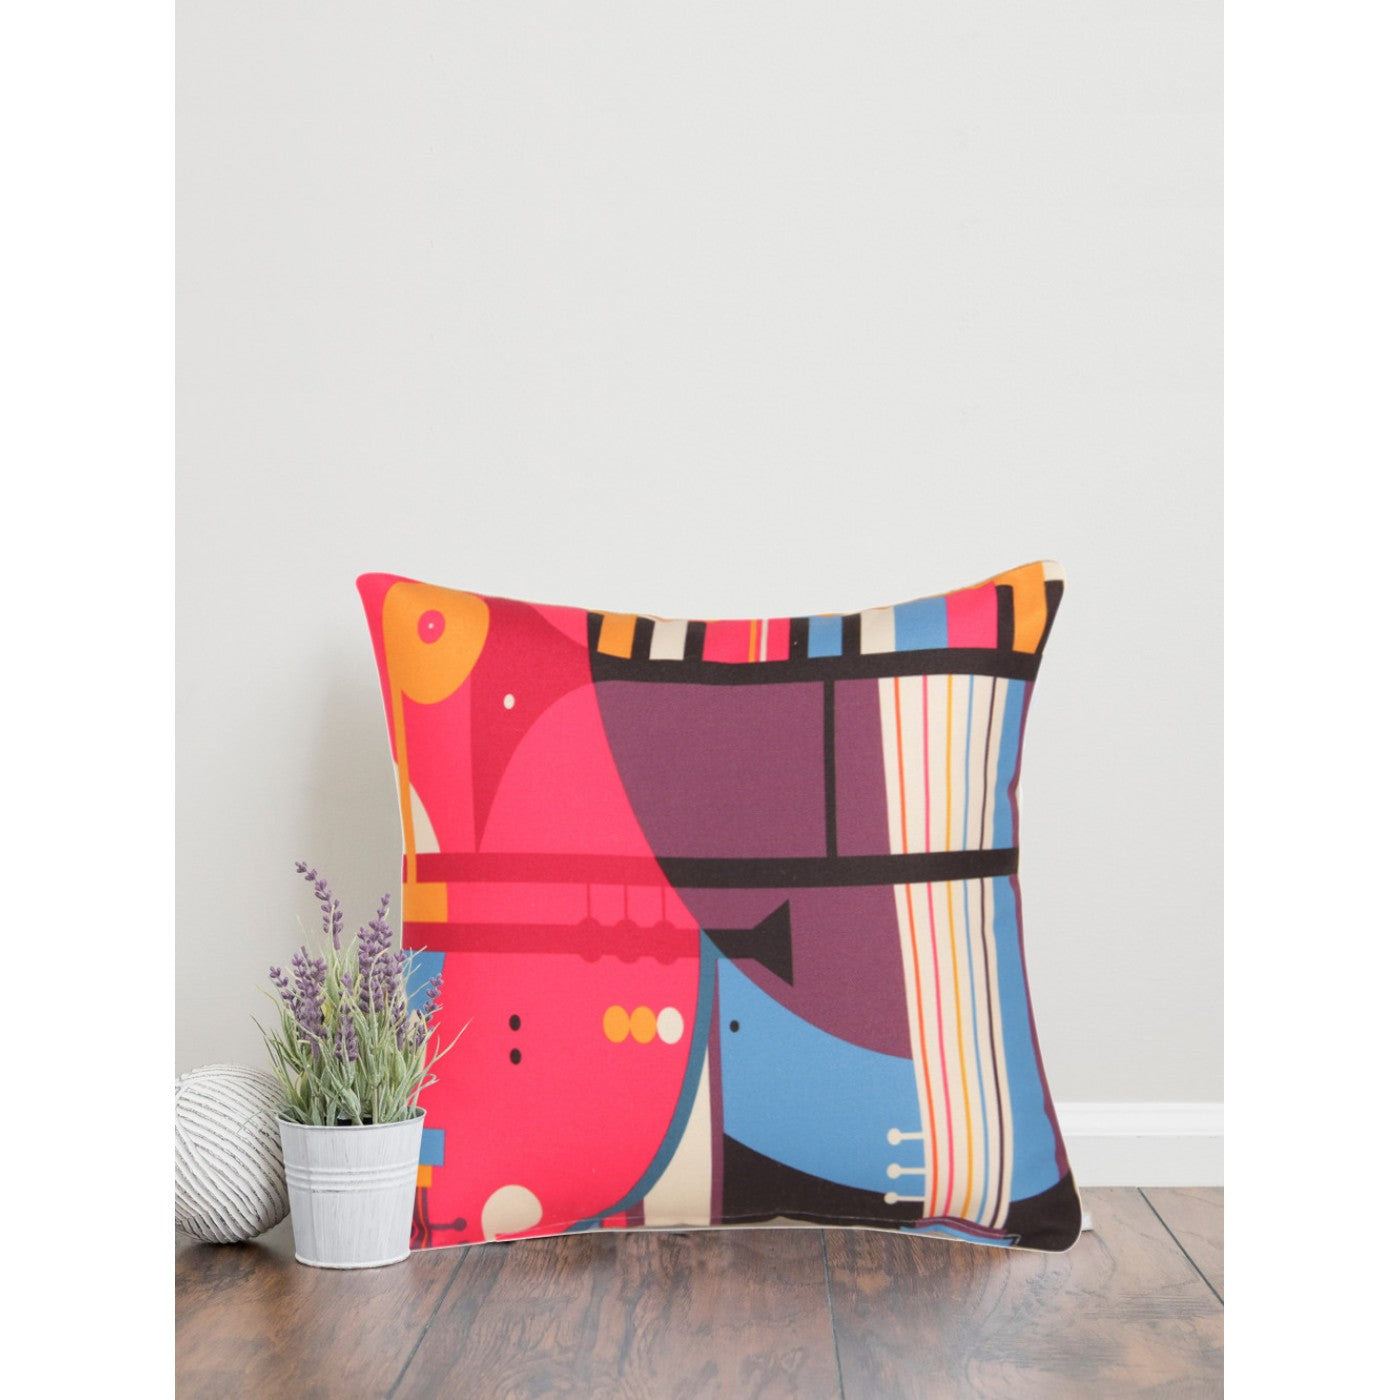 Chic 12x12 Inch Printed Cushion Cover: Elevate Your Living Space!